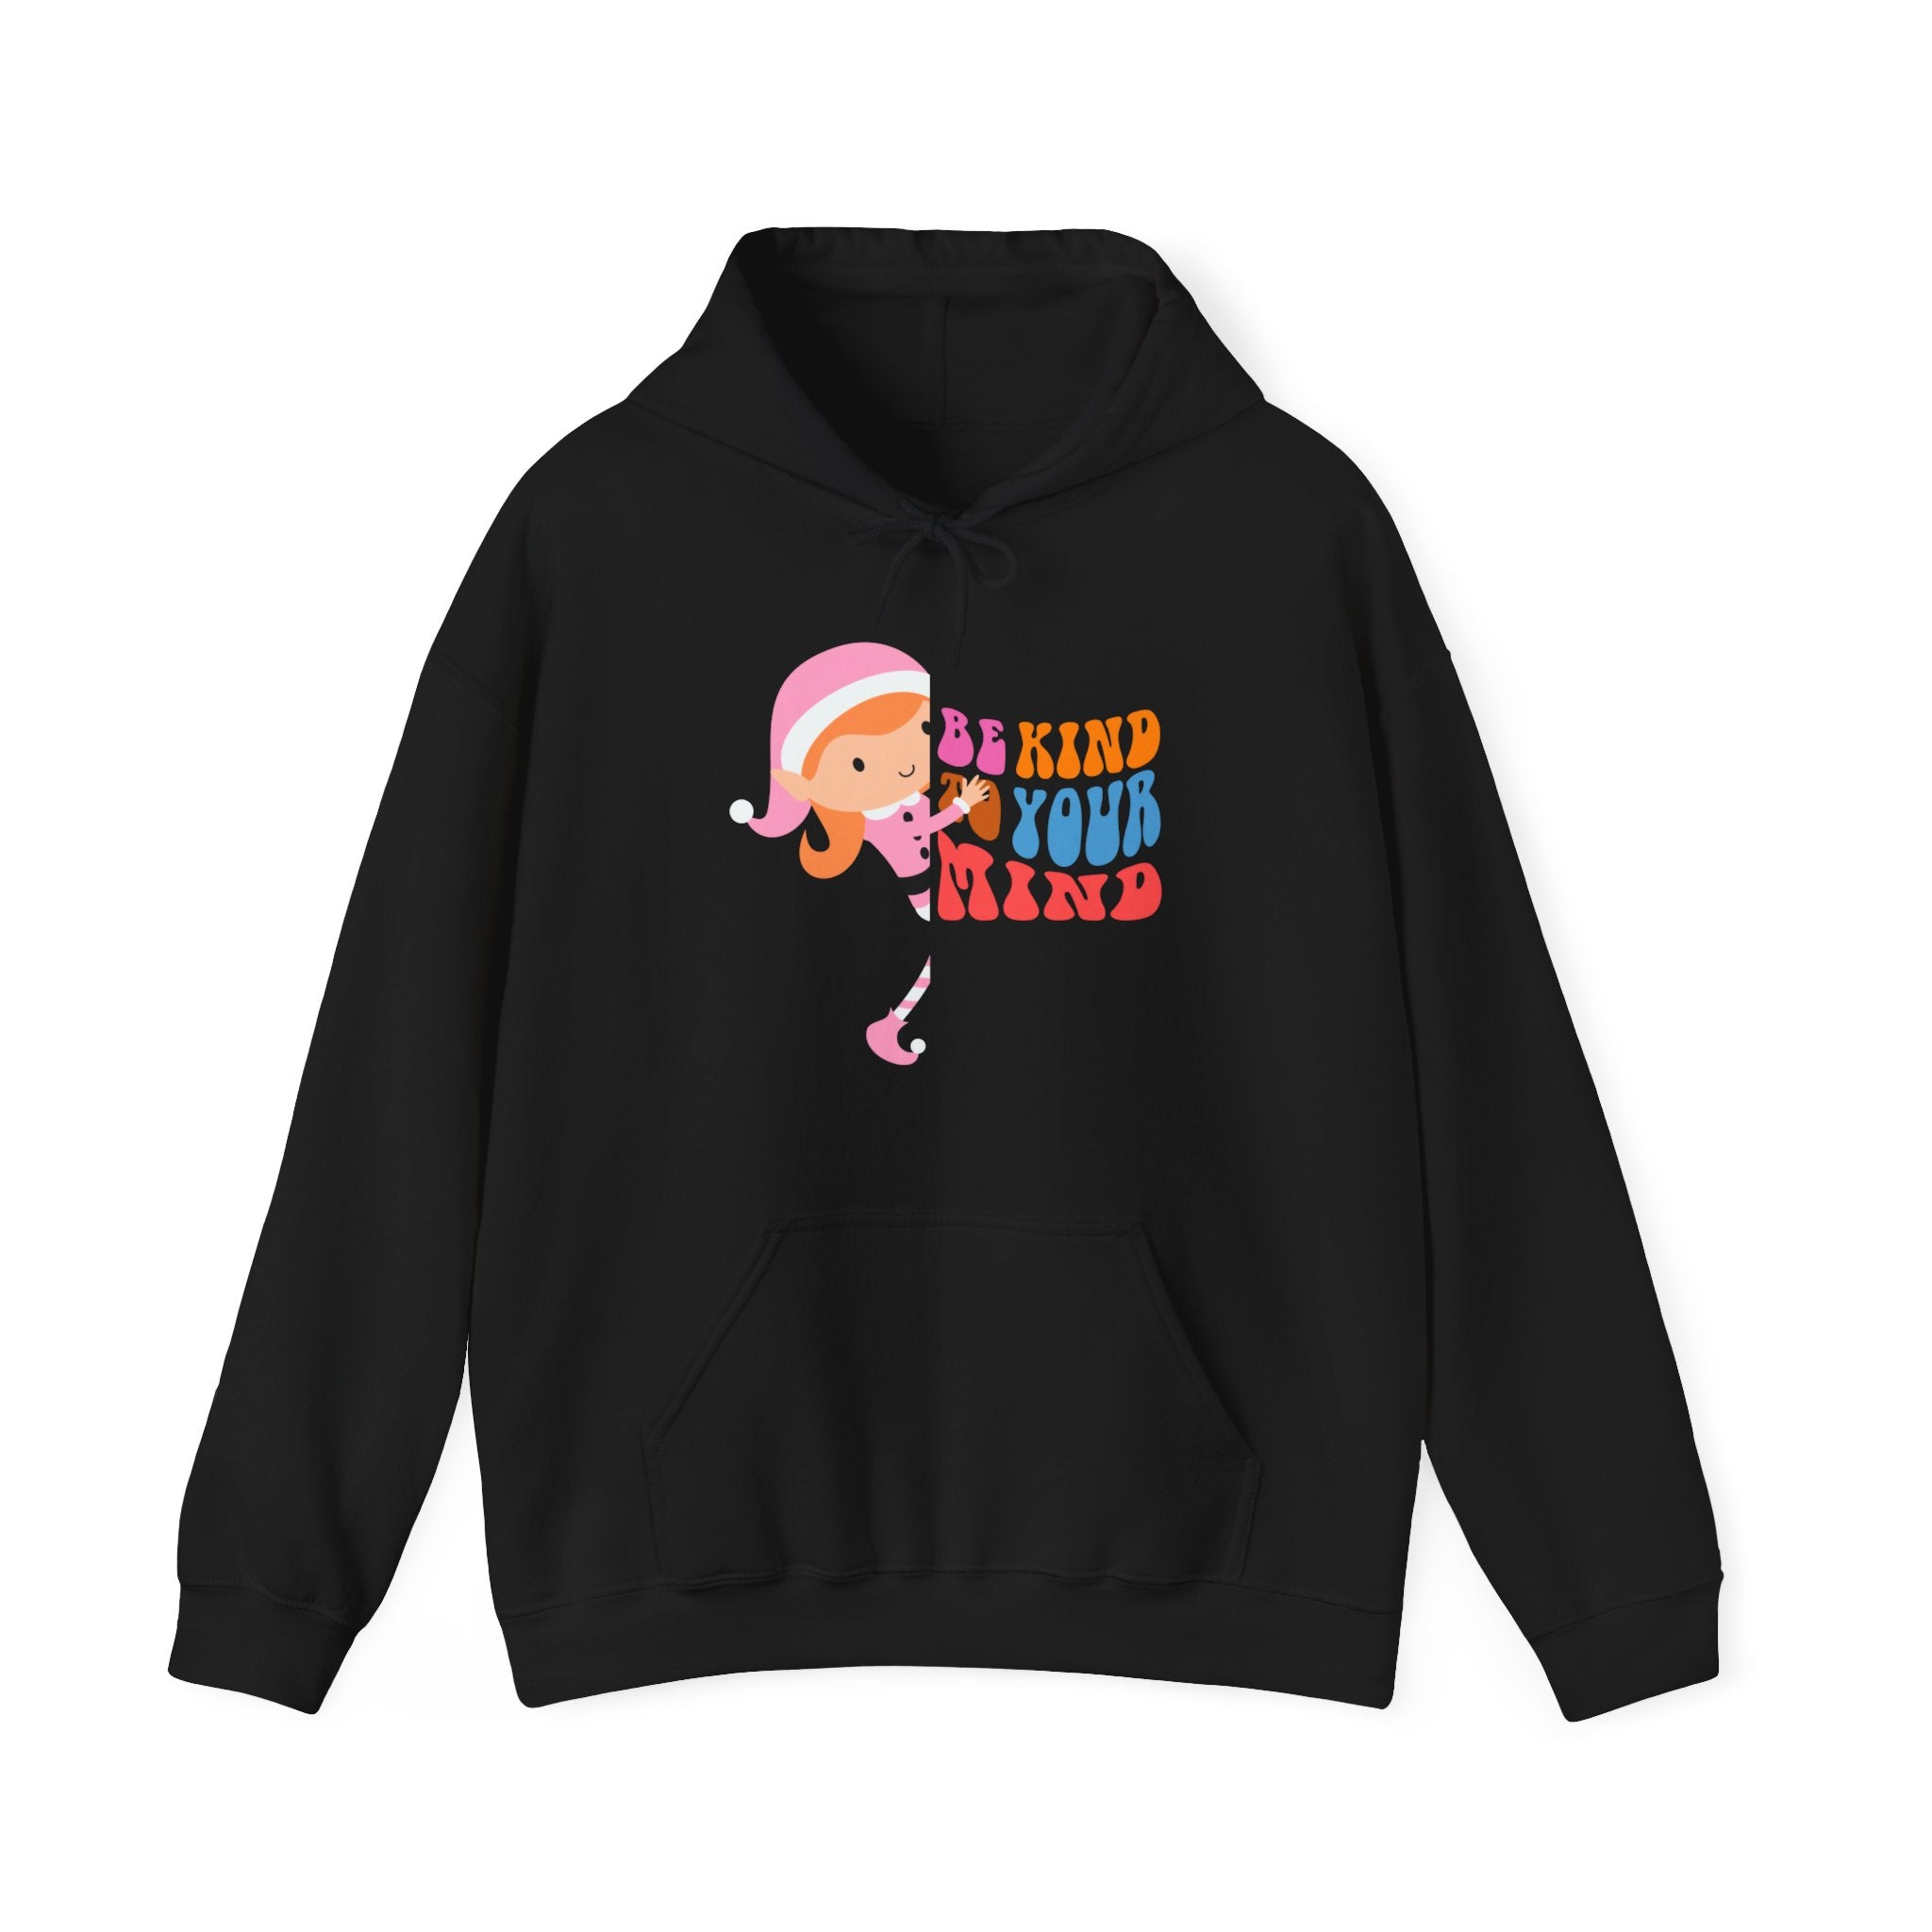 Be Kind To Your Mind : Regular Unisex Heavy Blend Hoodie